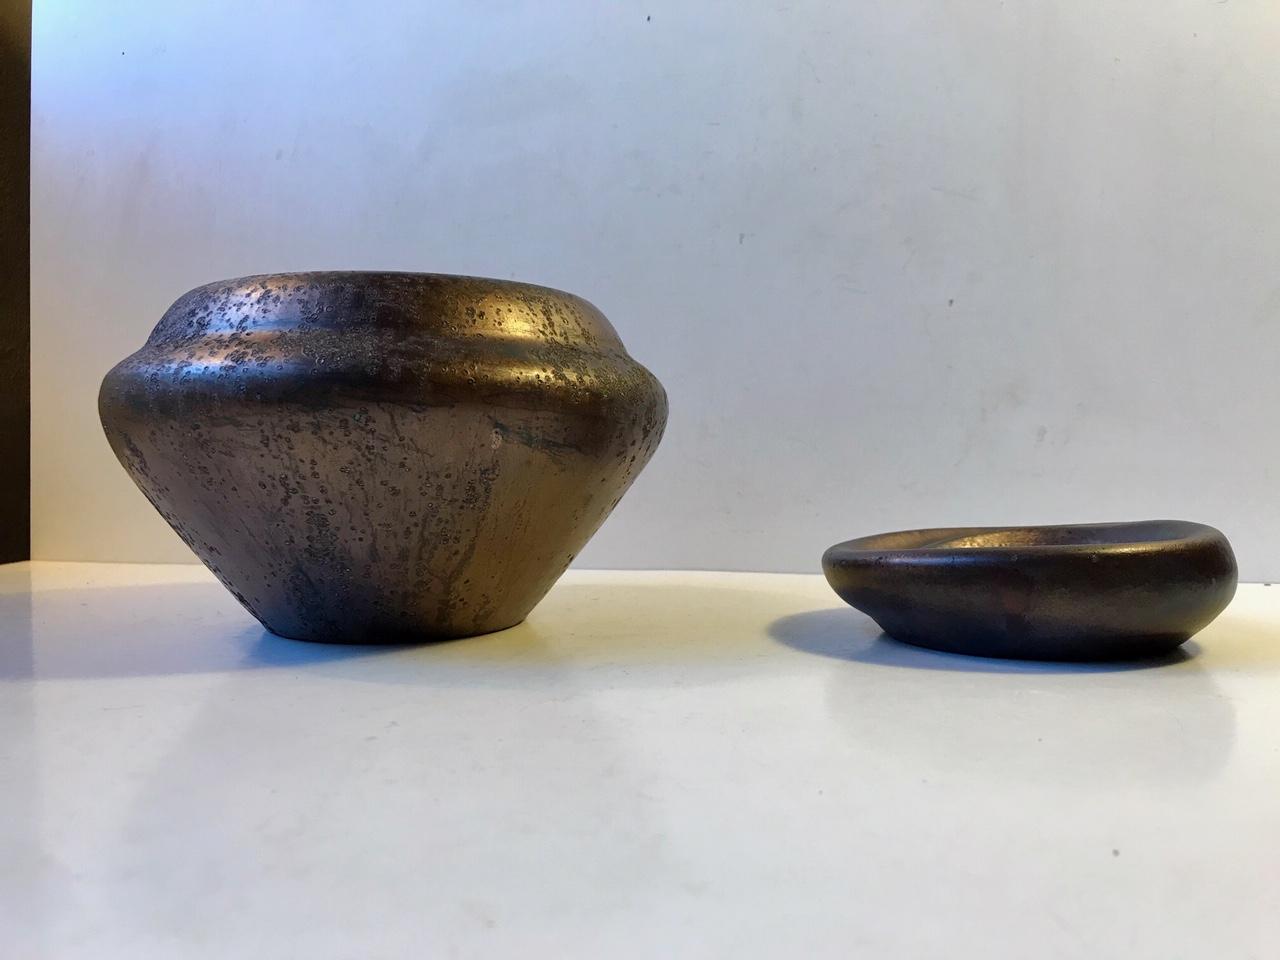 Vase and small matching dish from the workshop of Soren Kongstrand. These pieces are designed by his colleague and apprentice Jens Petersen. Both are unique pieces from circa 1935 and signed JP. Experimental glazes: metallic/copper based luster